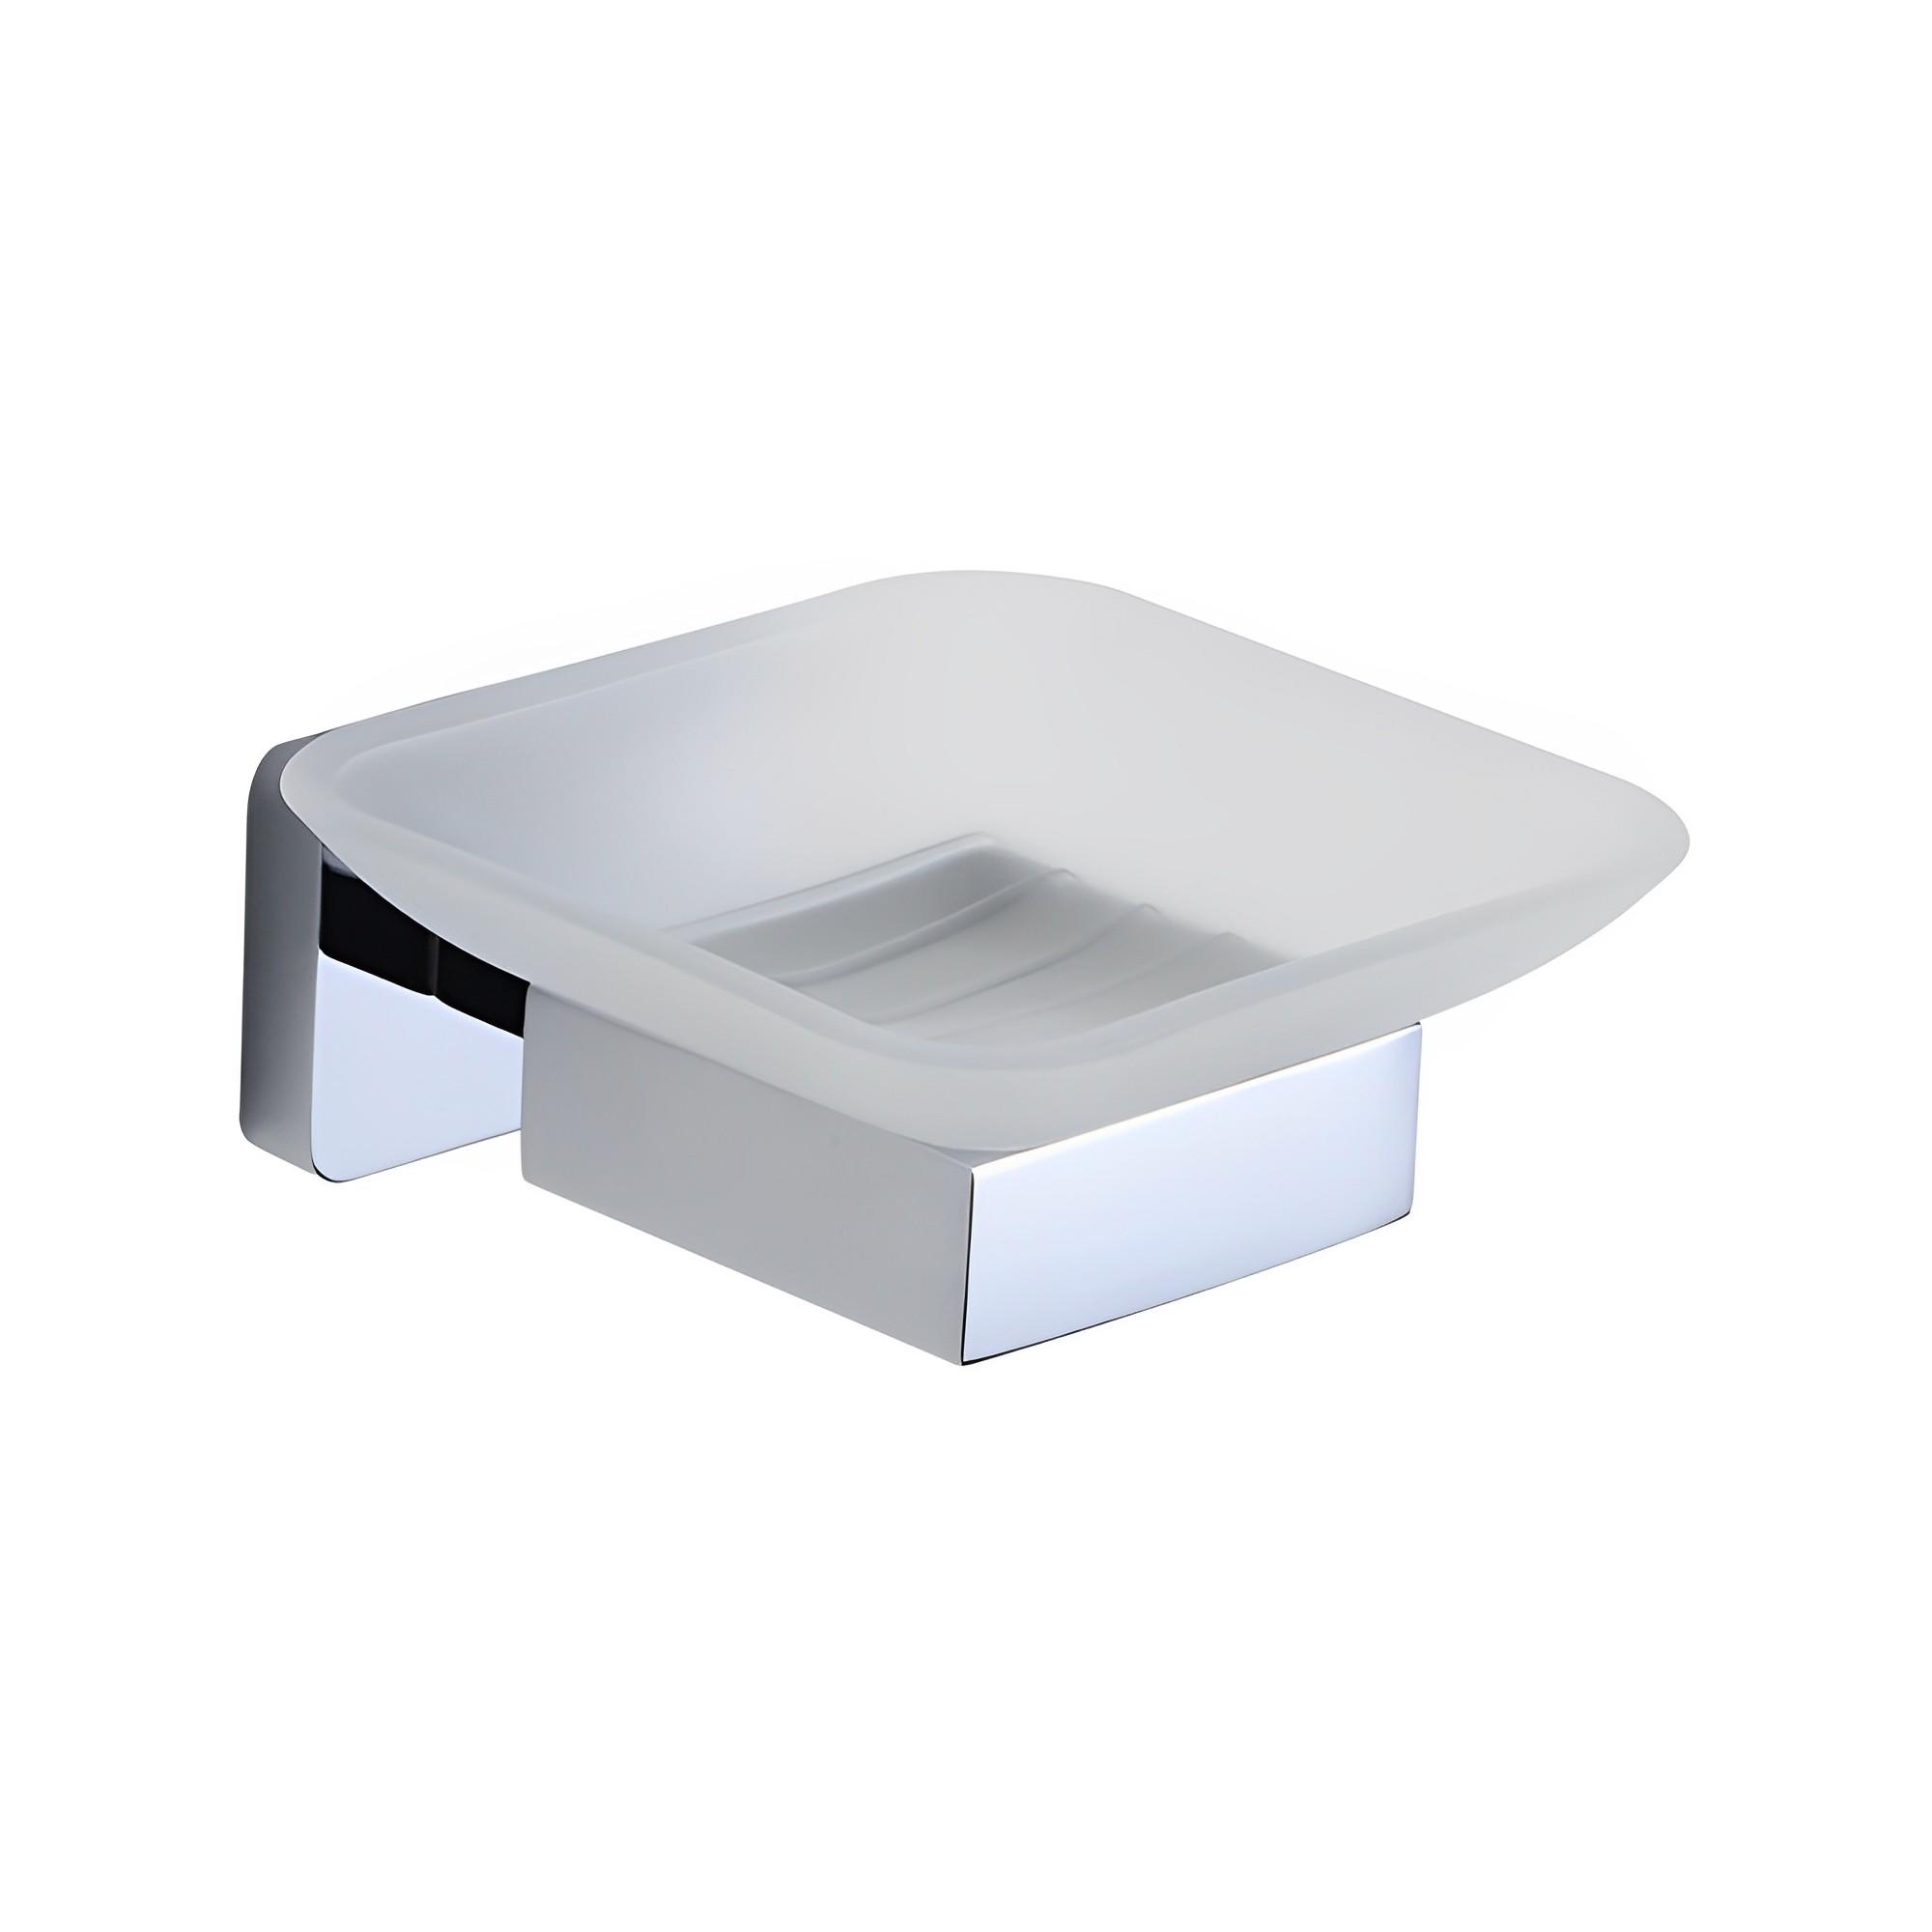 OJ-G1112L Glass Soap Dish Wall Mounted Chrome Square Holder with Soap Dish Brass Bathroom Accessories